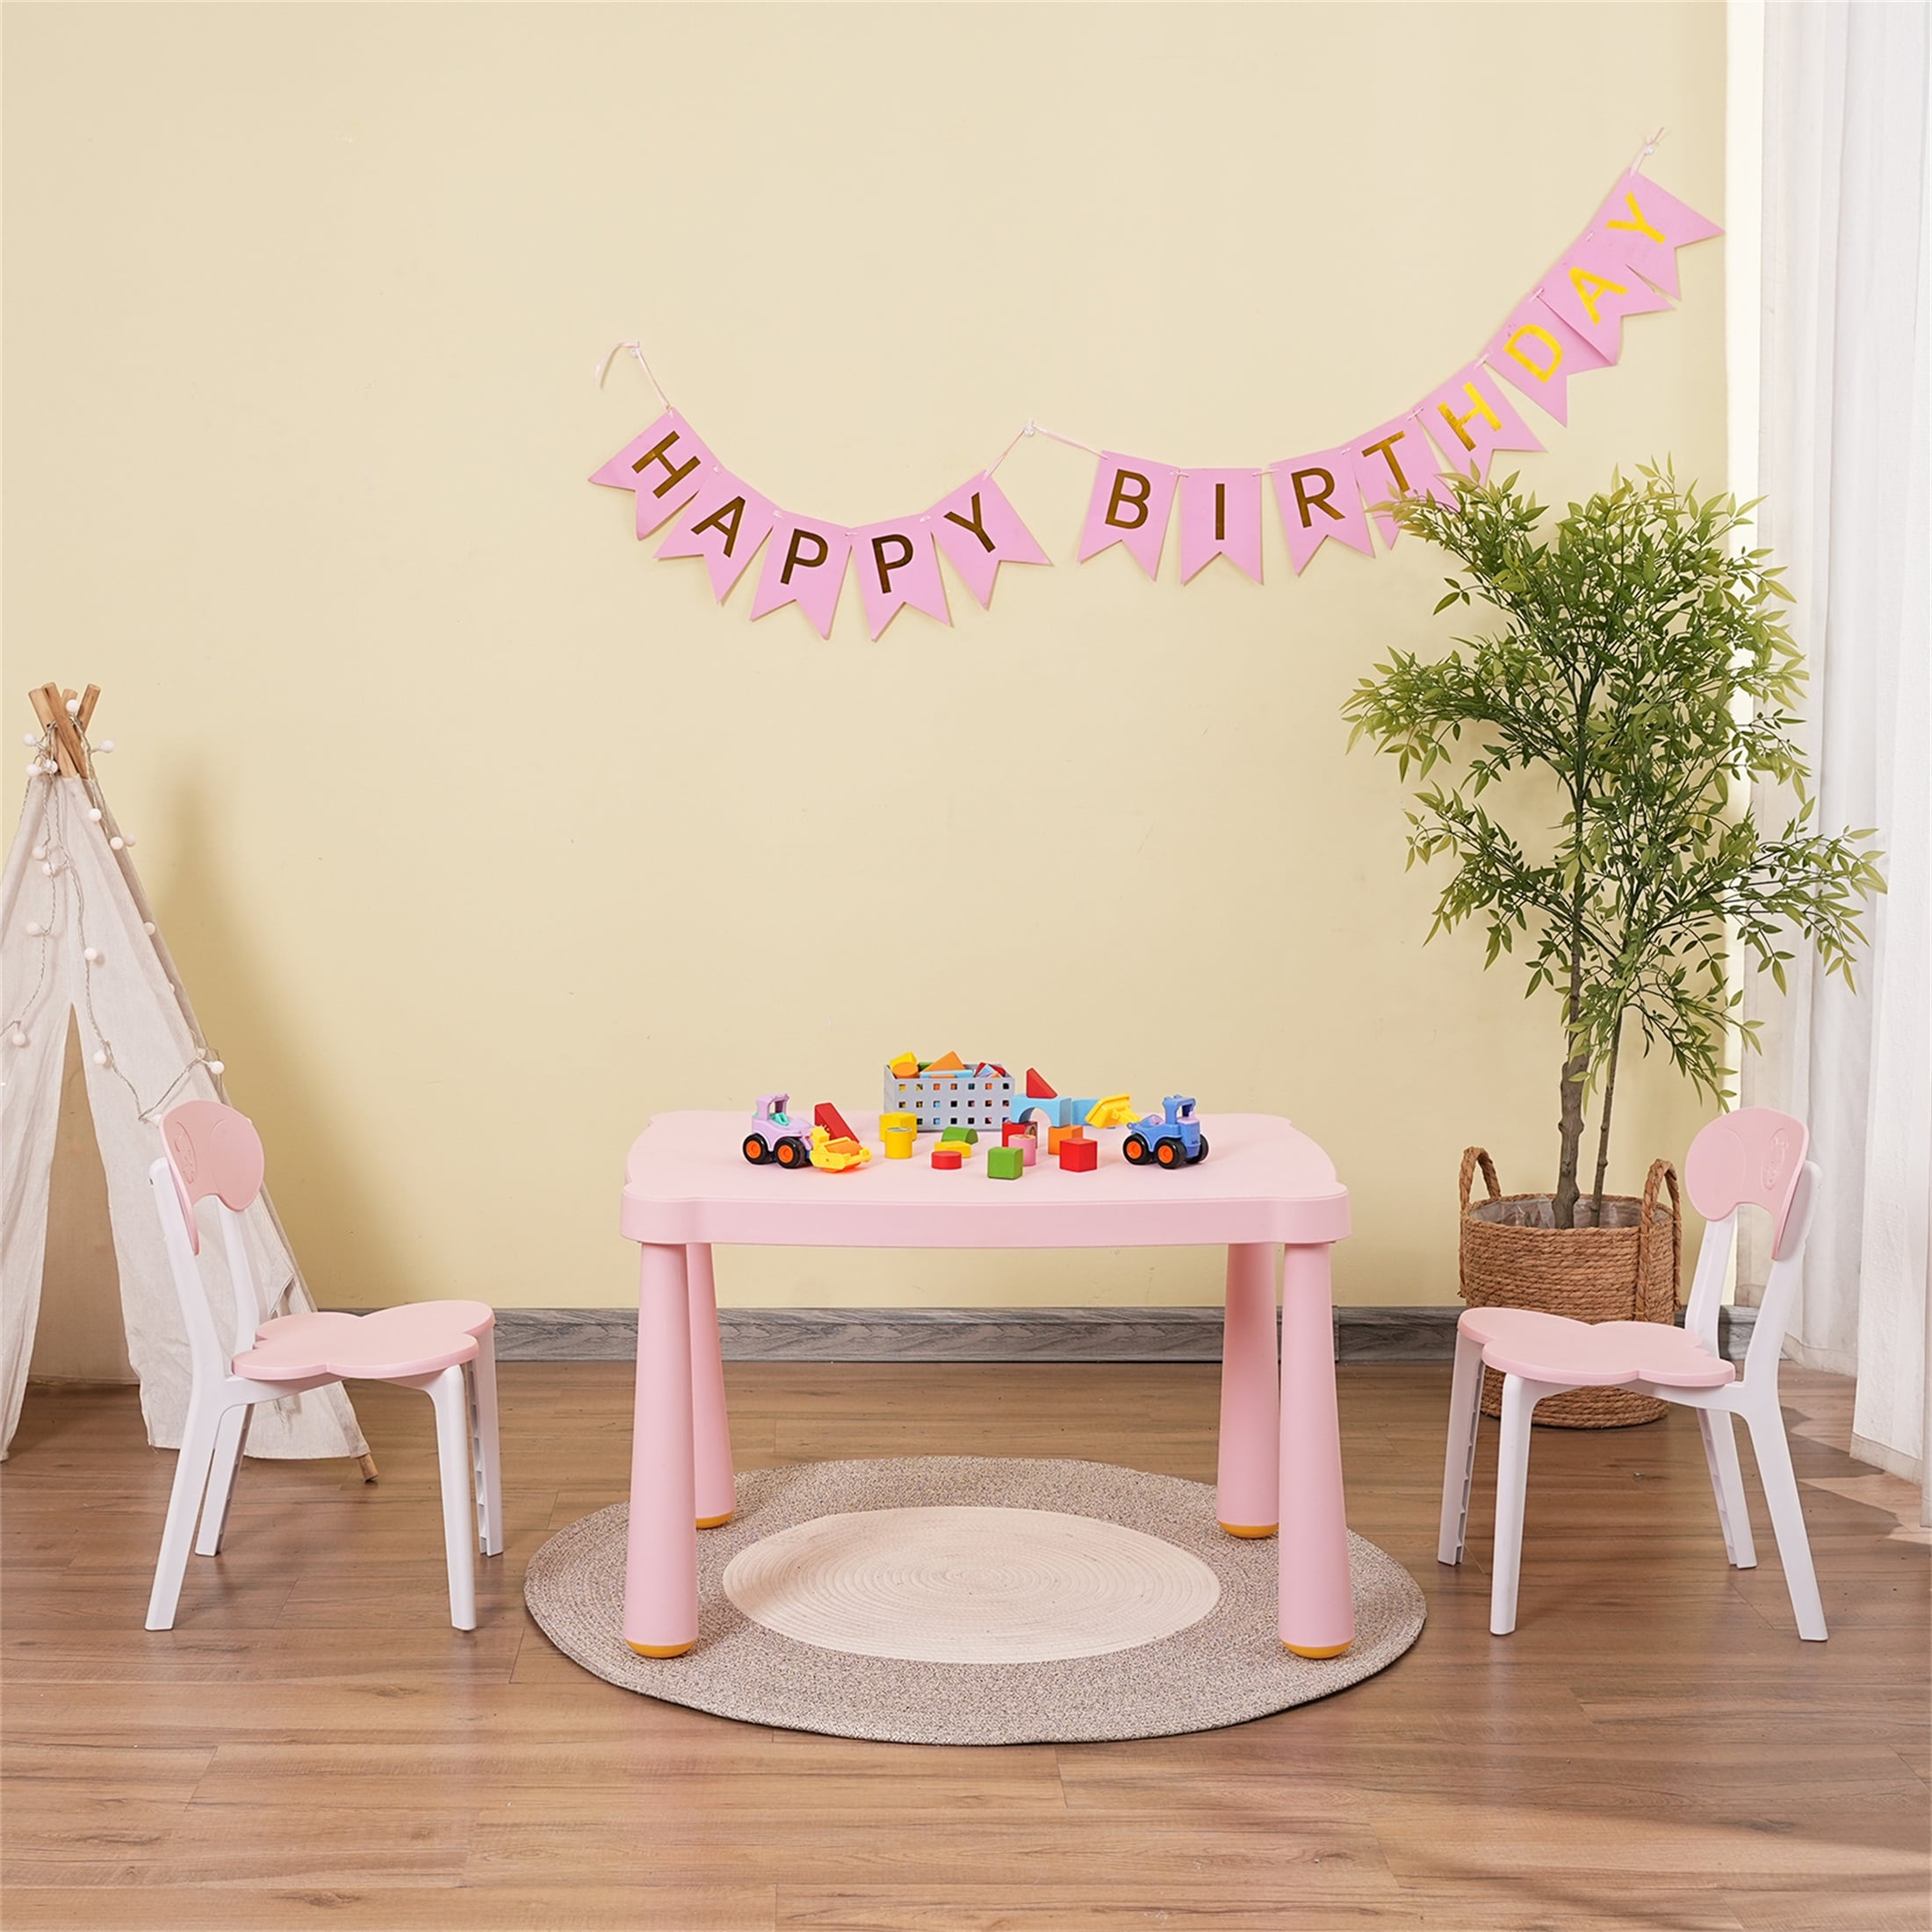 https://ak1.ostkcdn.com/images/products/is/images/direct/96e478c7c2aff10a503b022b54a3a8f2a549d9ab/Kids-Table-and-Chair-Set.jpg